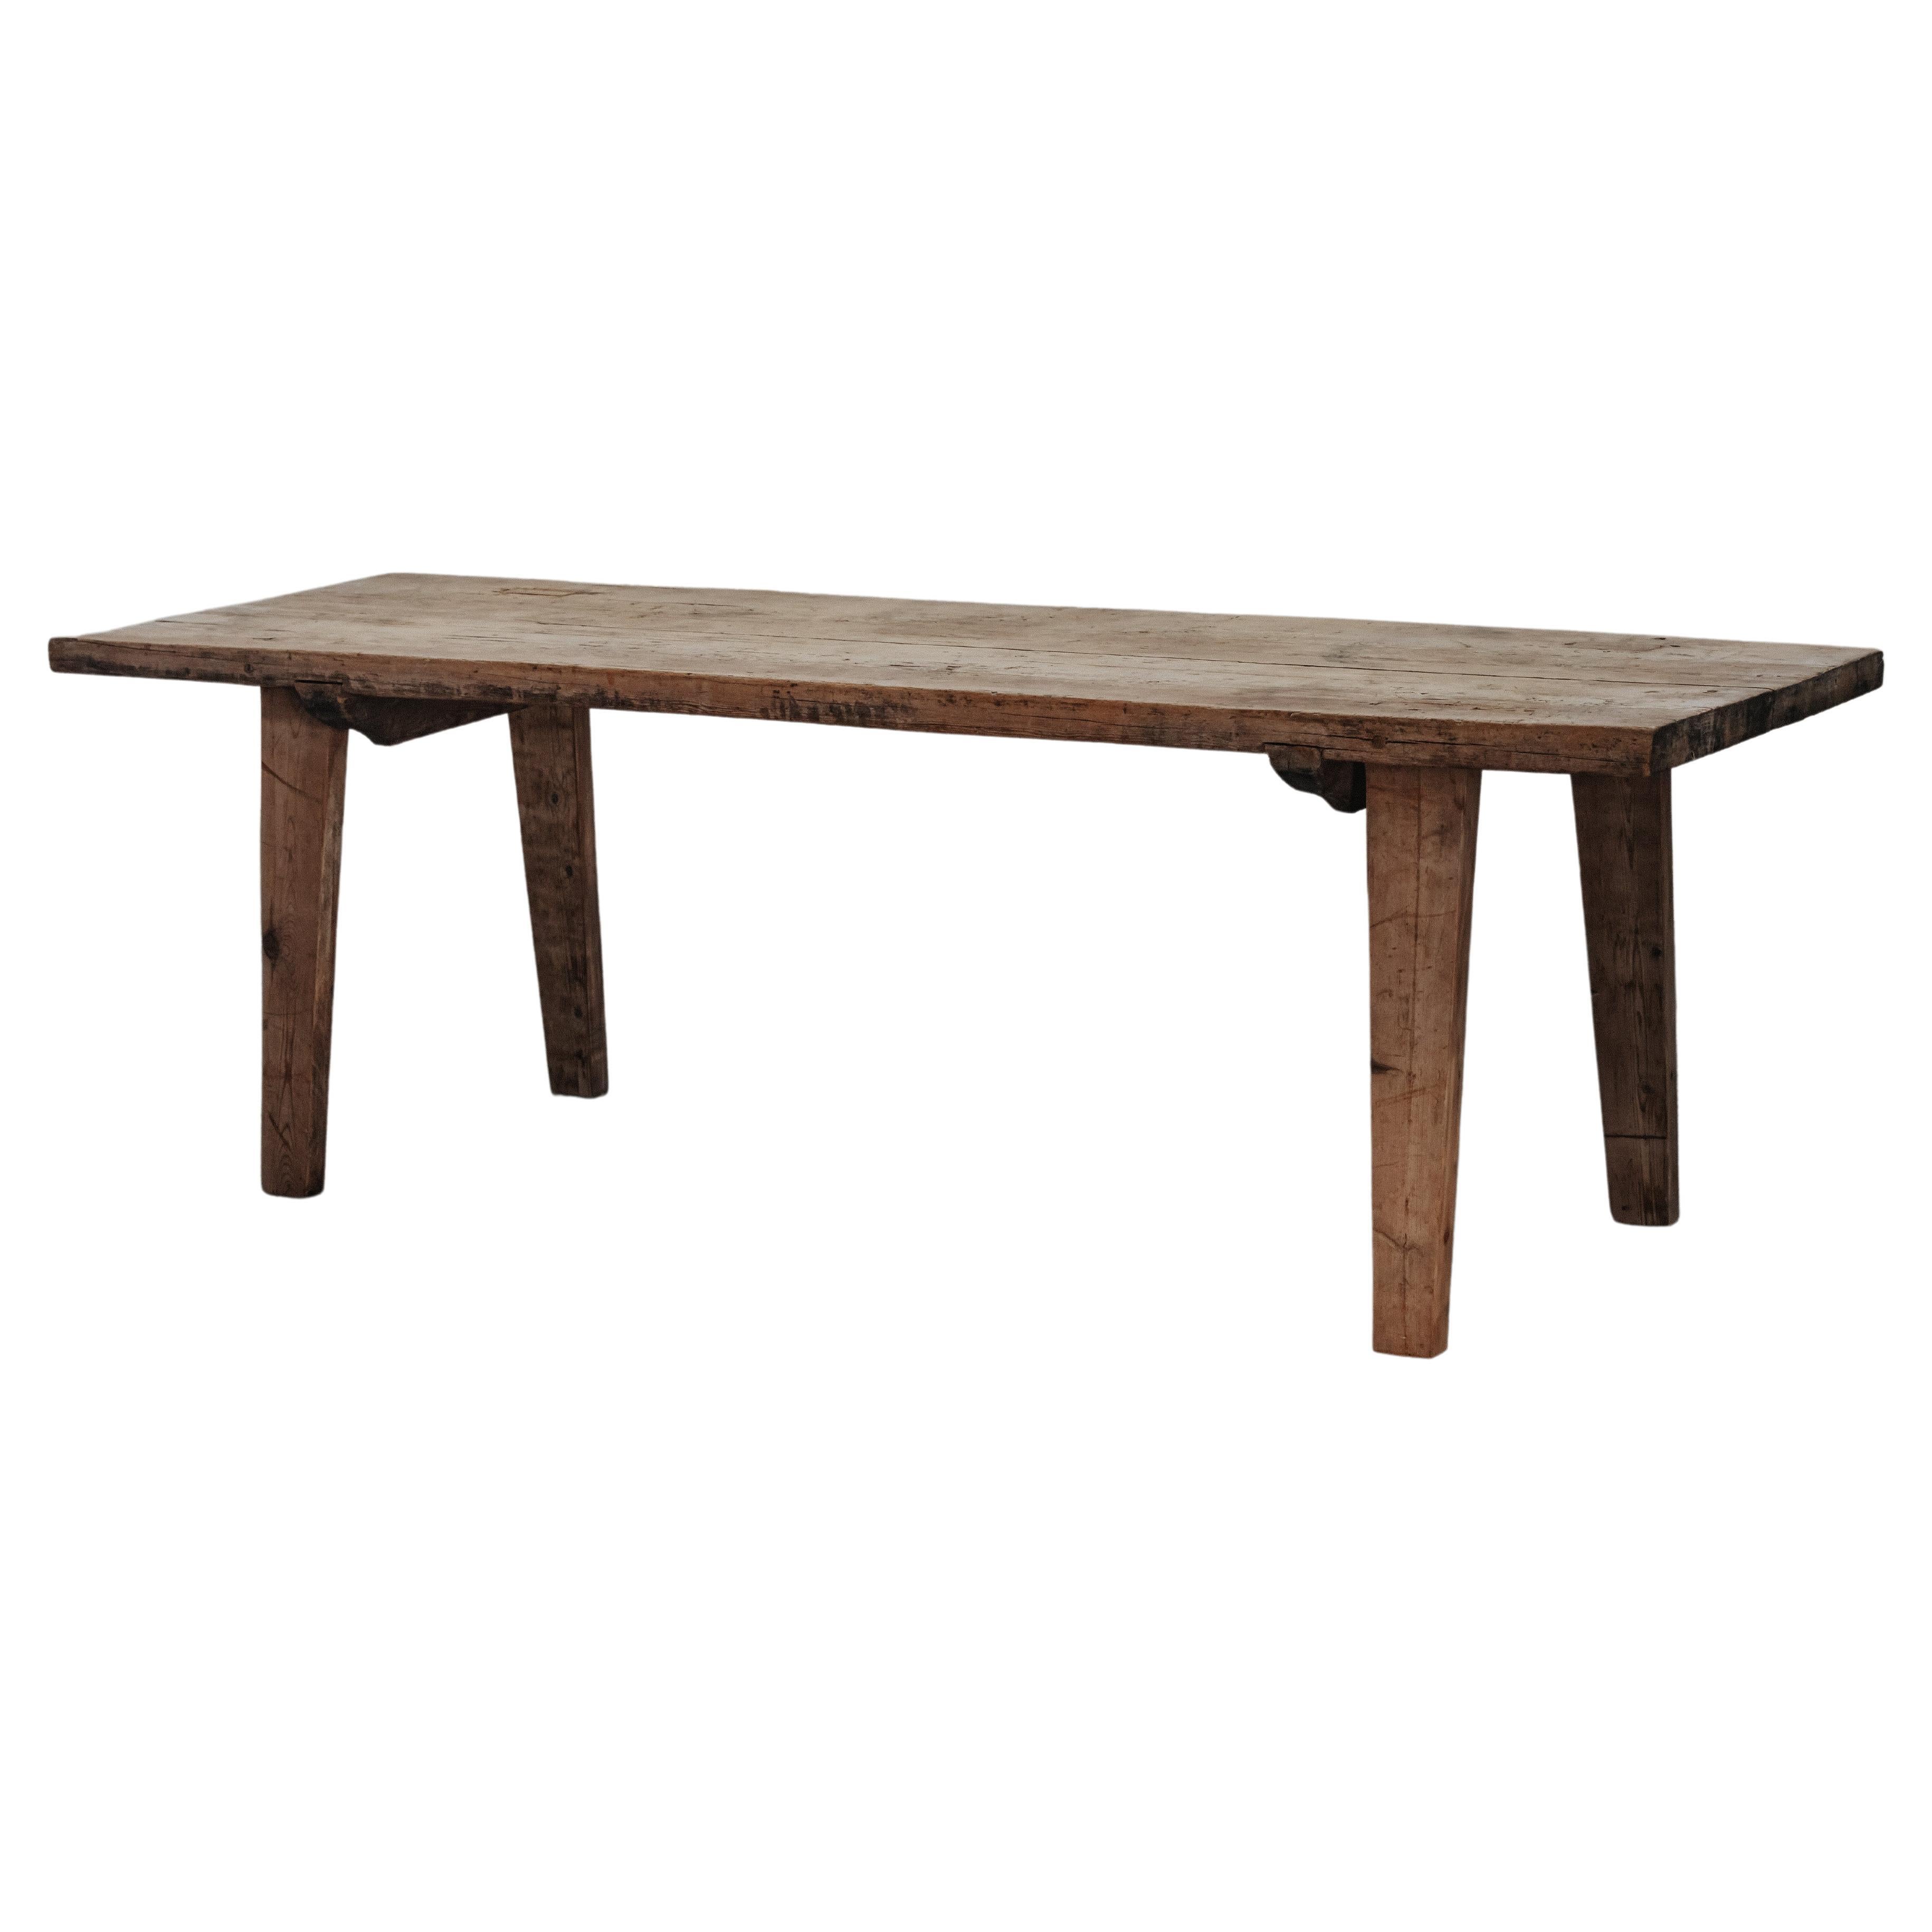 Rare "Hedna" Dining Table From Sweden, Circa 1800 For Sale